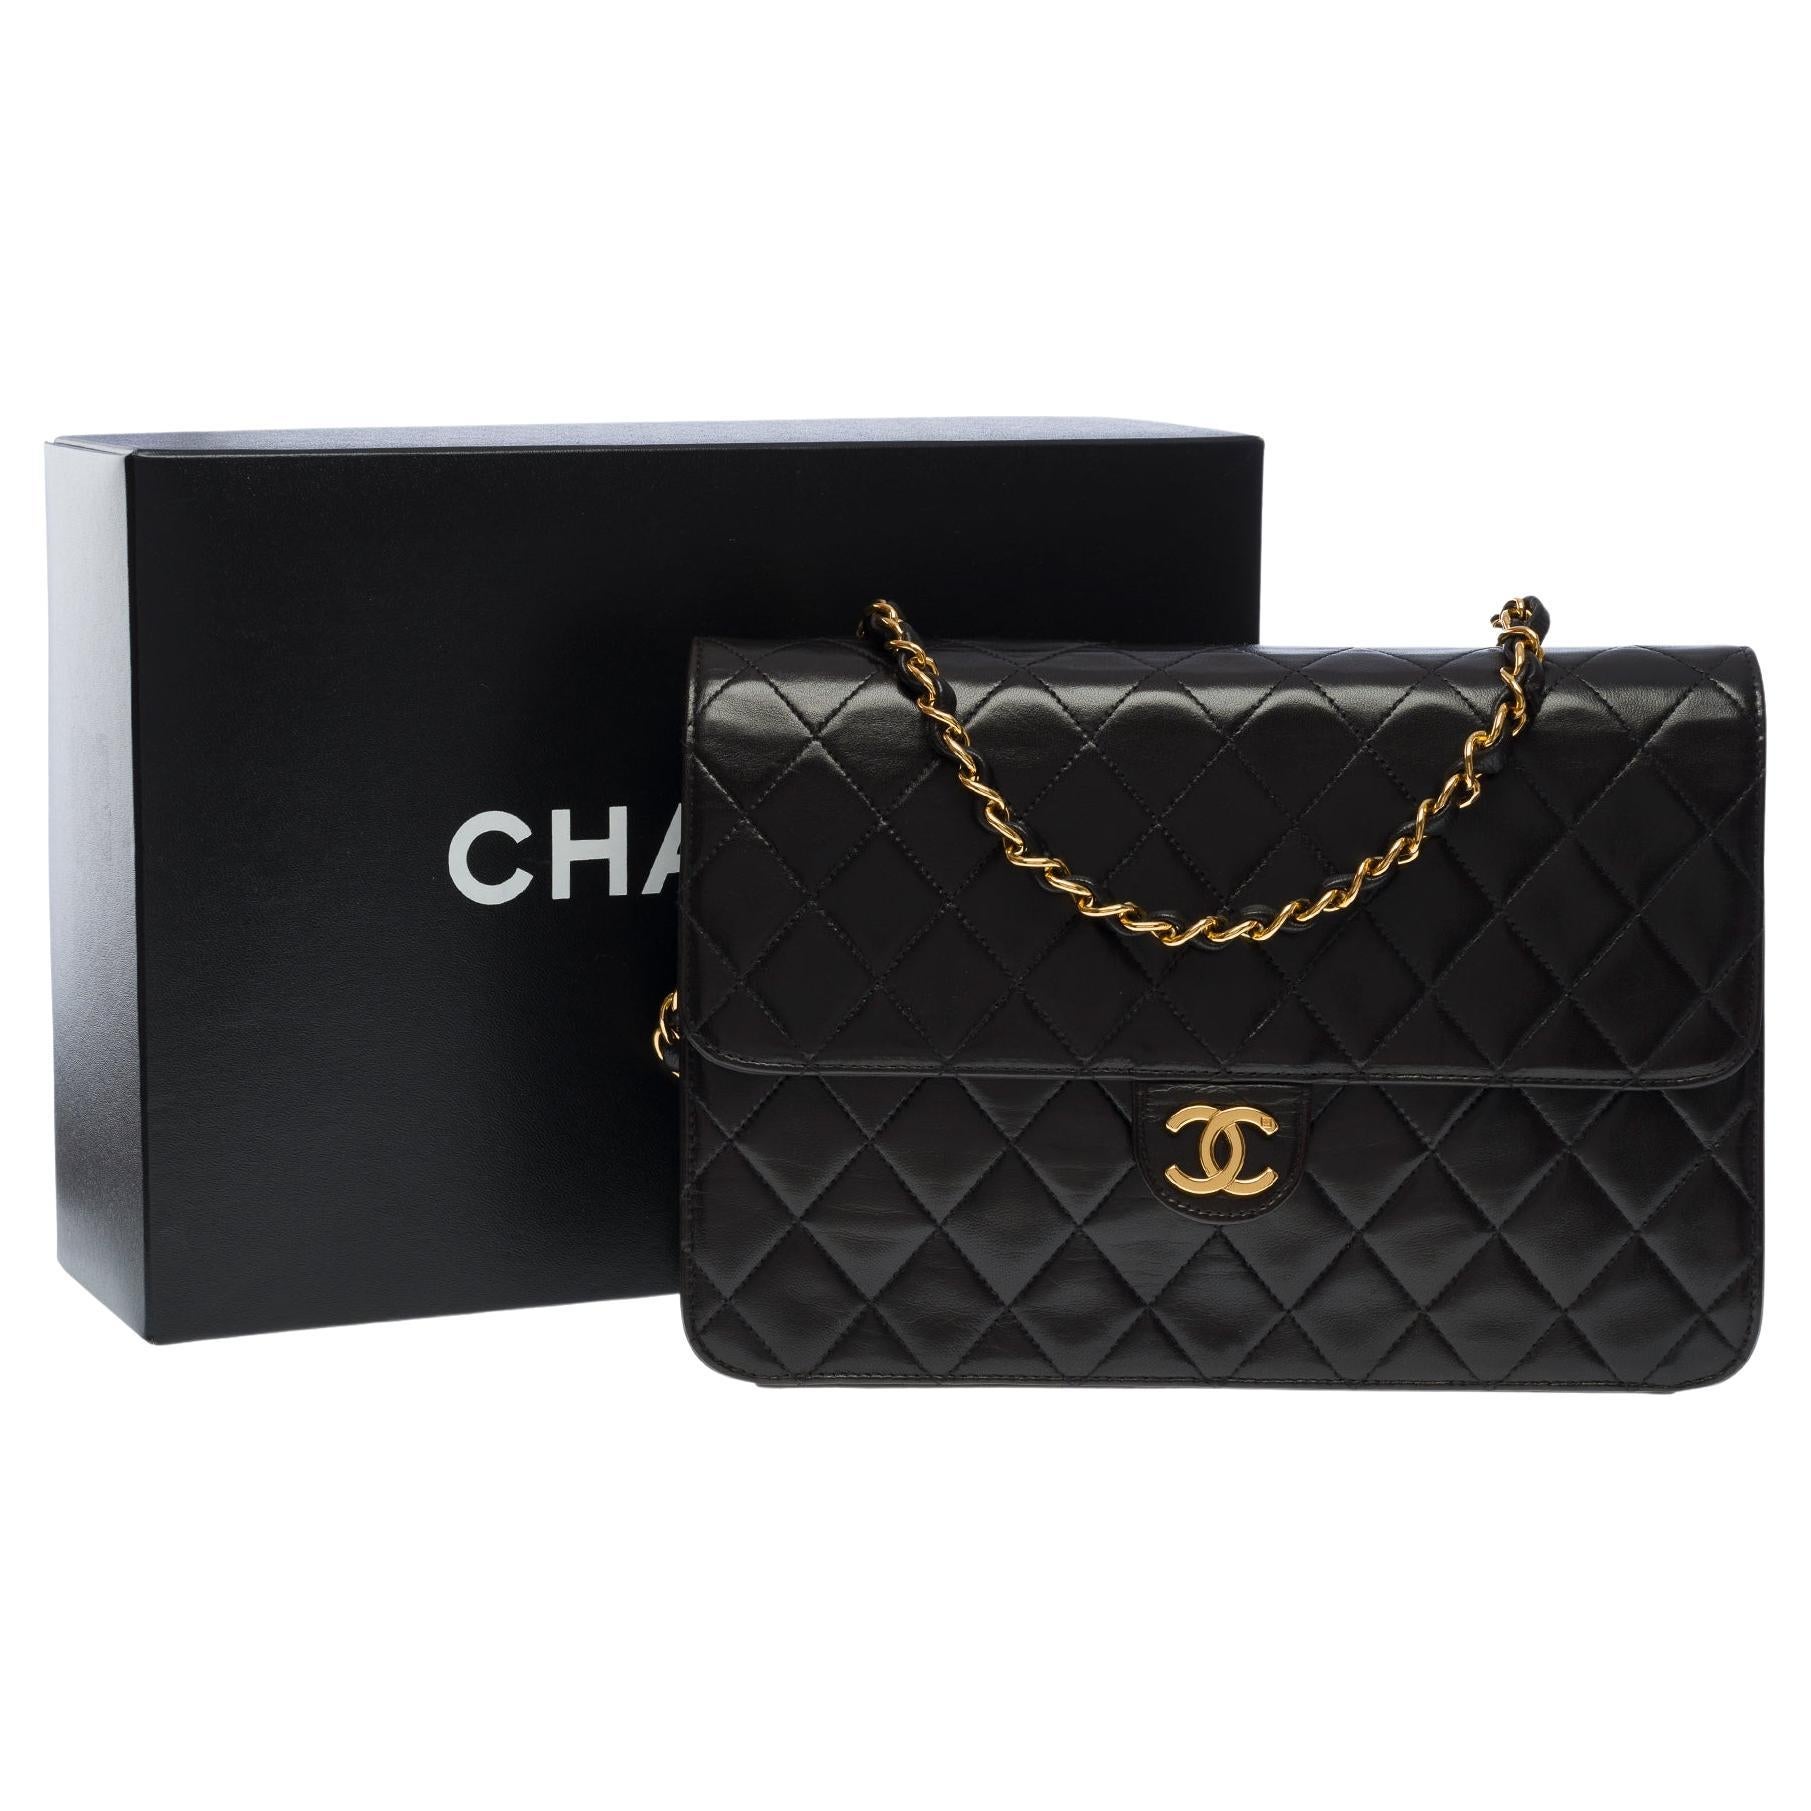 Gorgeous Chanel Classic shoulder flap bag in black quilted